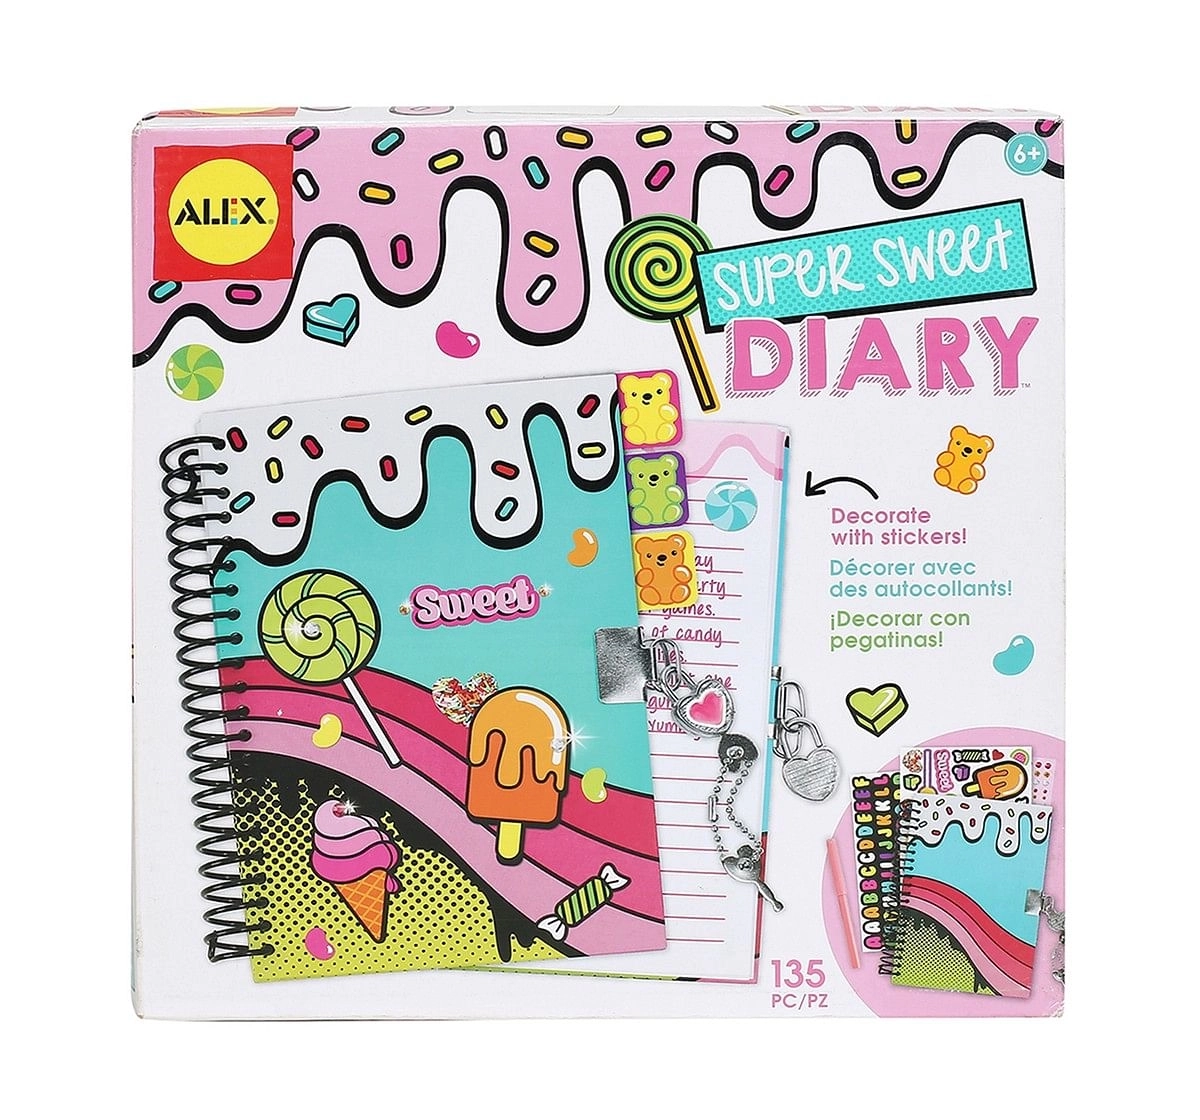 Alex Toys  Super Sweet Diary, Multi Color DIY Art & Craft Kits for Kids age 6Y+ 